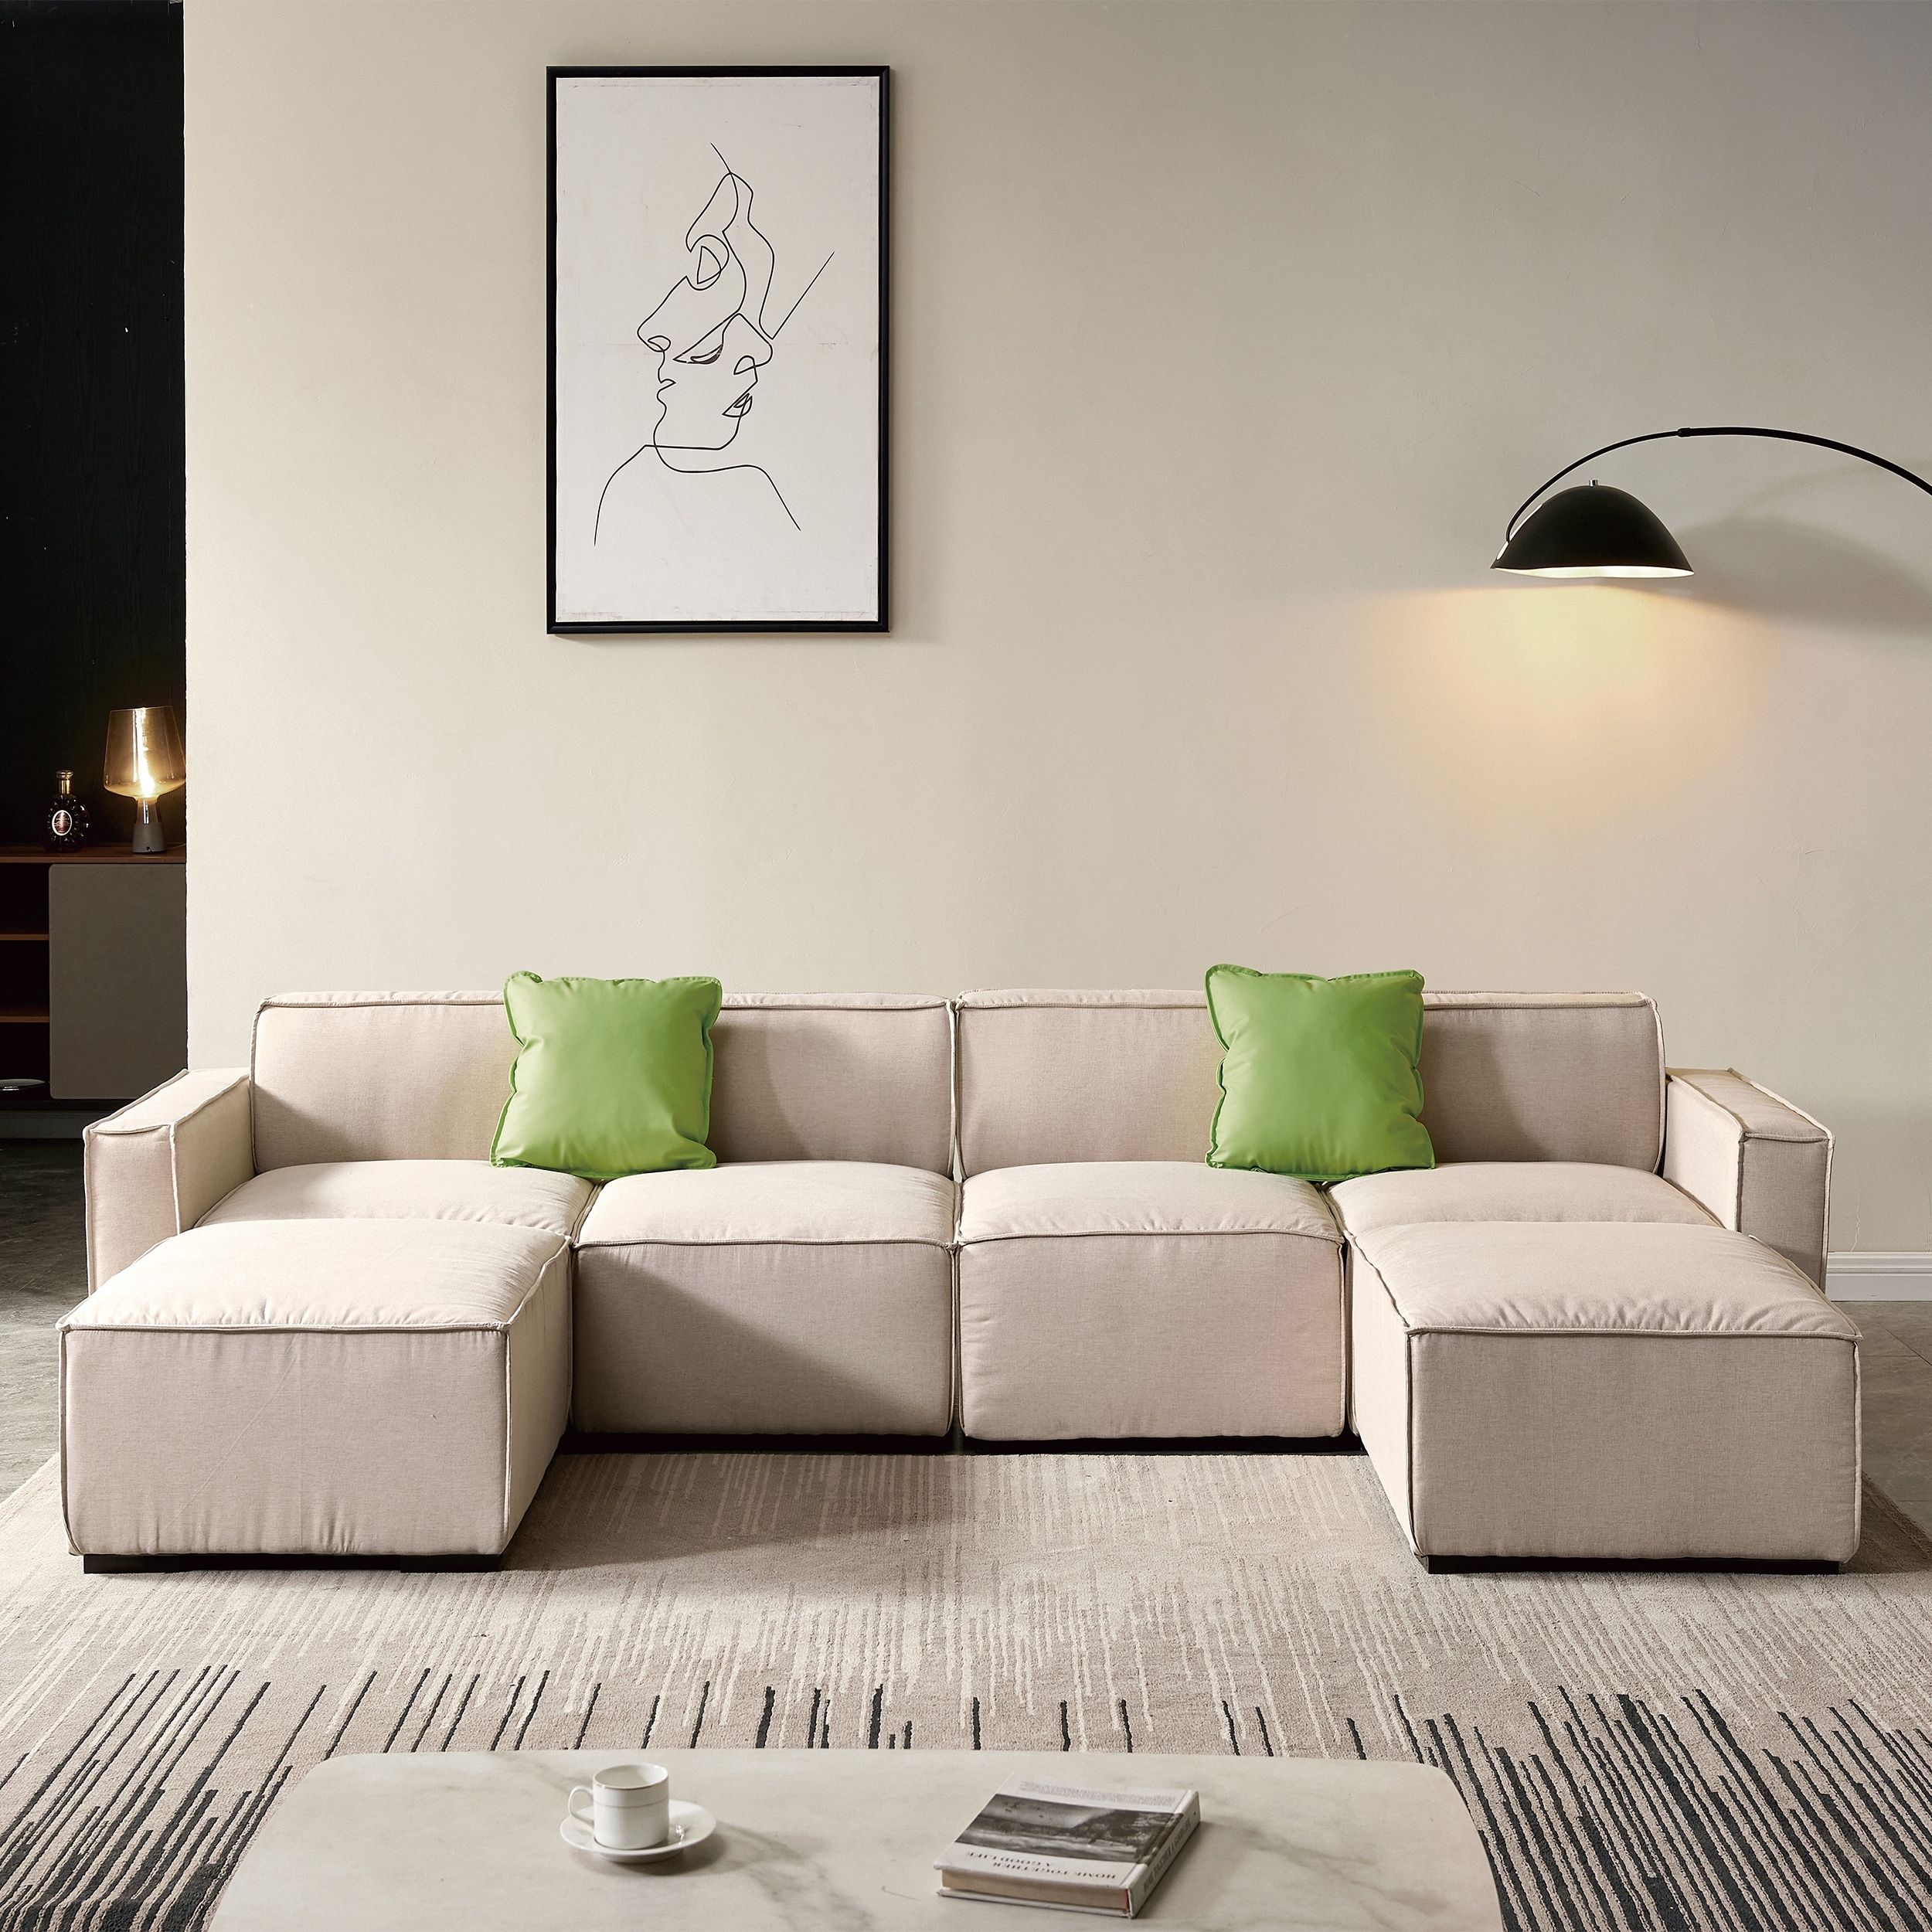 131" Convertible Modular Sectional Sofa Sets Modern U Shaped Sectional Couch  With Removable Ottomans For Living Room – Bed Bath & Beyond – 38149280 Throughout Modern U Shaped Sectional Couch Sets (View 10 of 15)